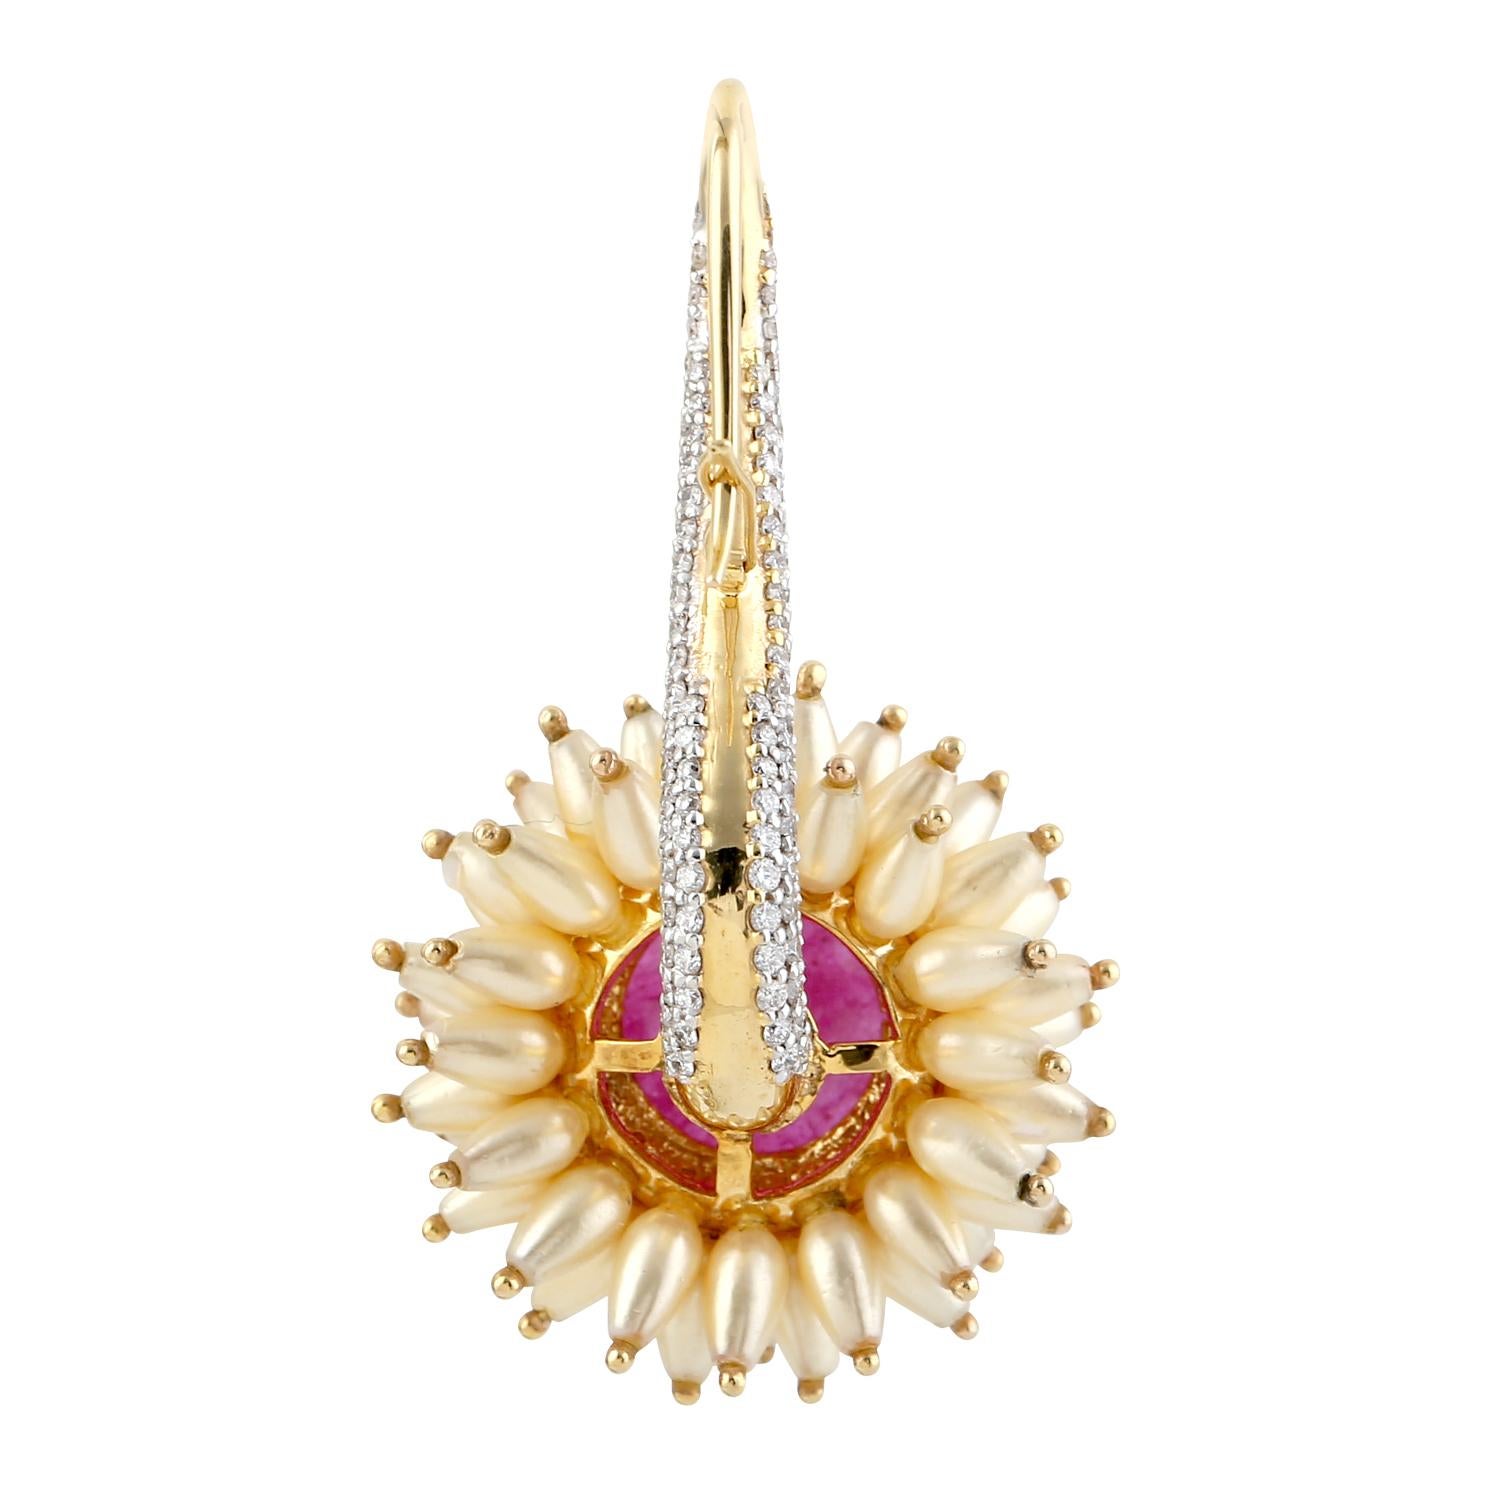 Cast from 18-karat gold.  These beautiful earrings are hand set with 13.25 carats ruby, 36.2 carats pearl and 3.12 carats of sparkling diamonds.

FOLLOW  MEGHNA JEWELS storefront to view the latest collection & exclusive pieces.  Meghna Jewels is